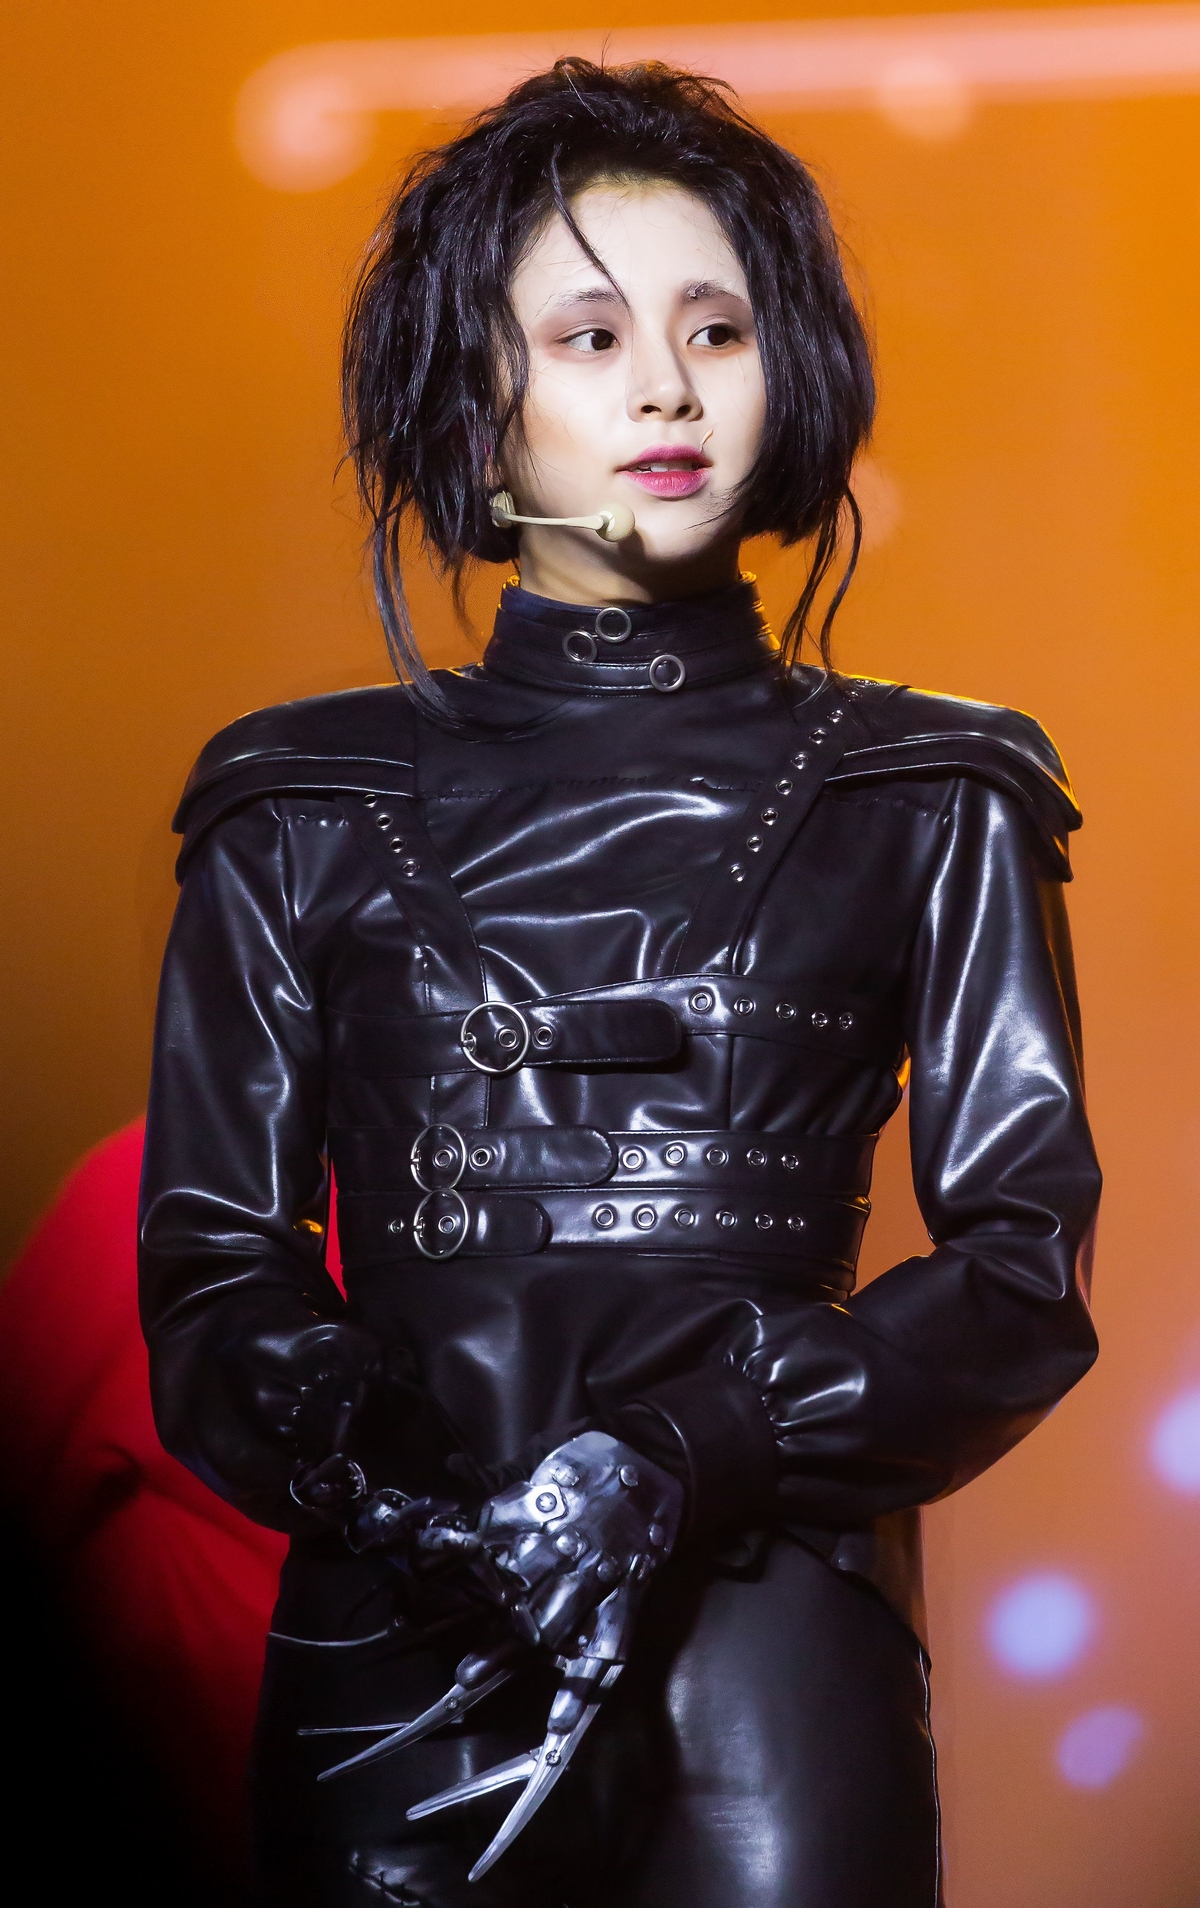 Chaeyoung dressed as Edward Scissorhands